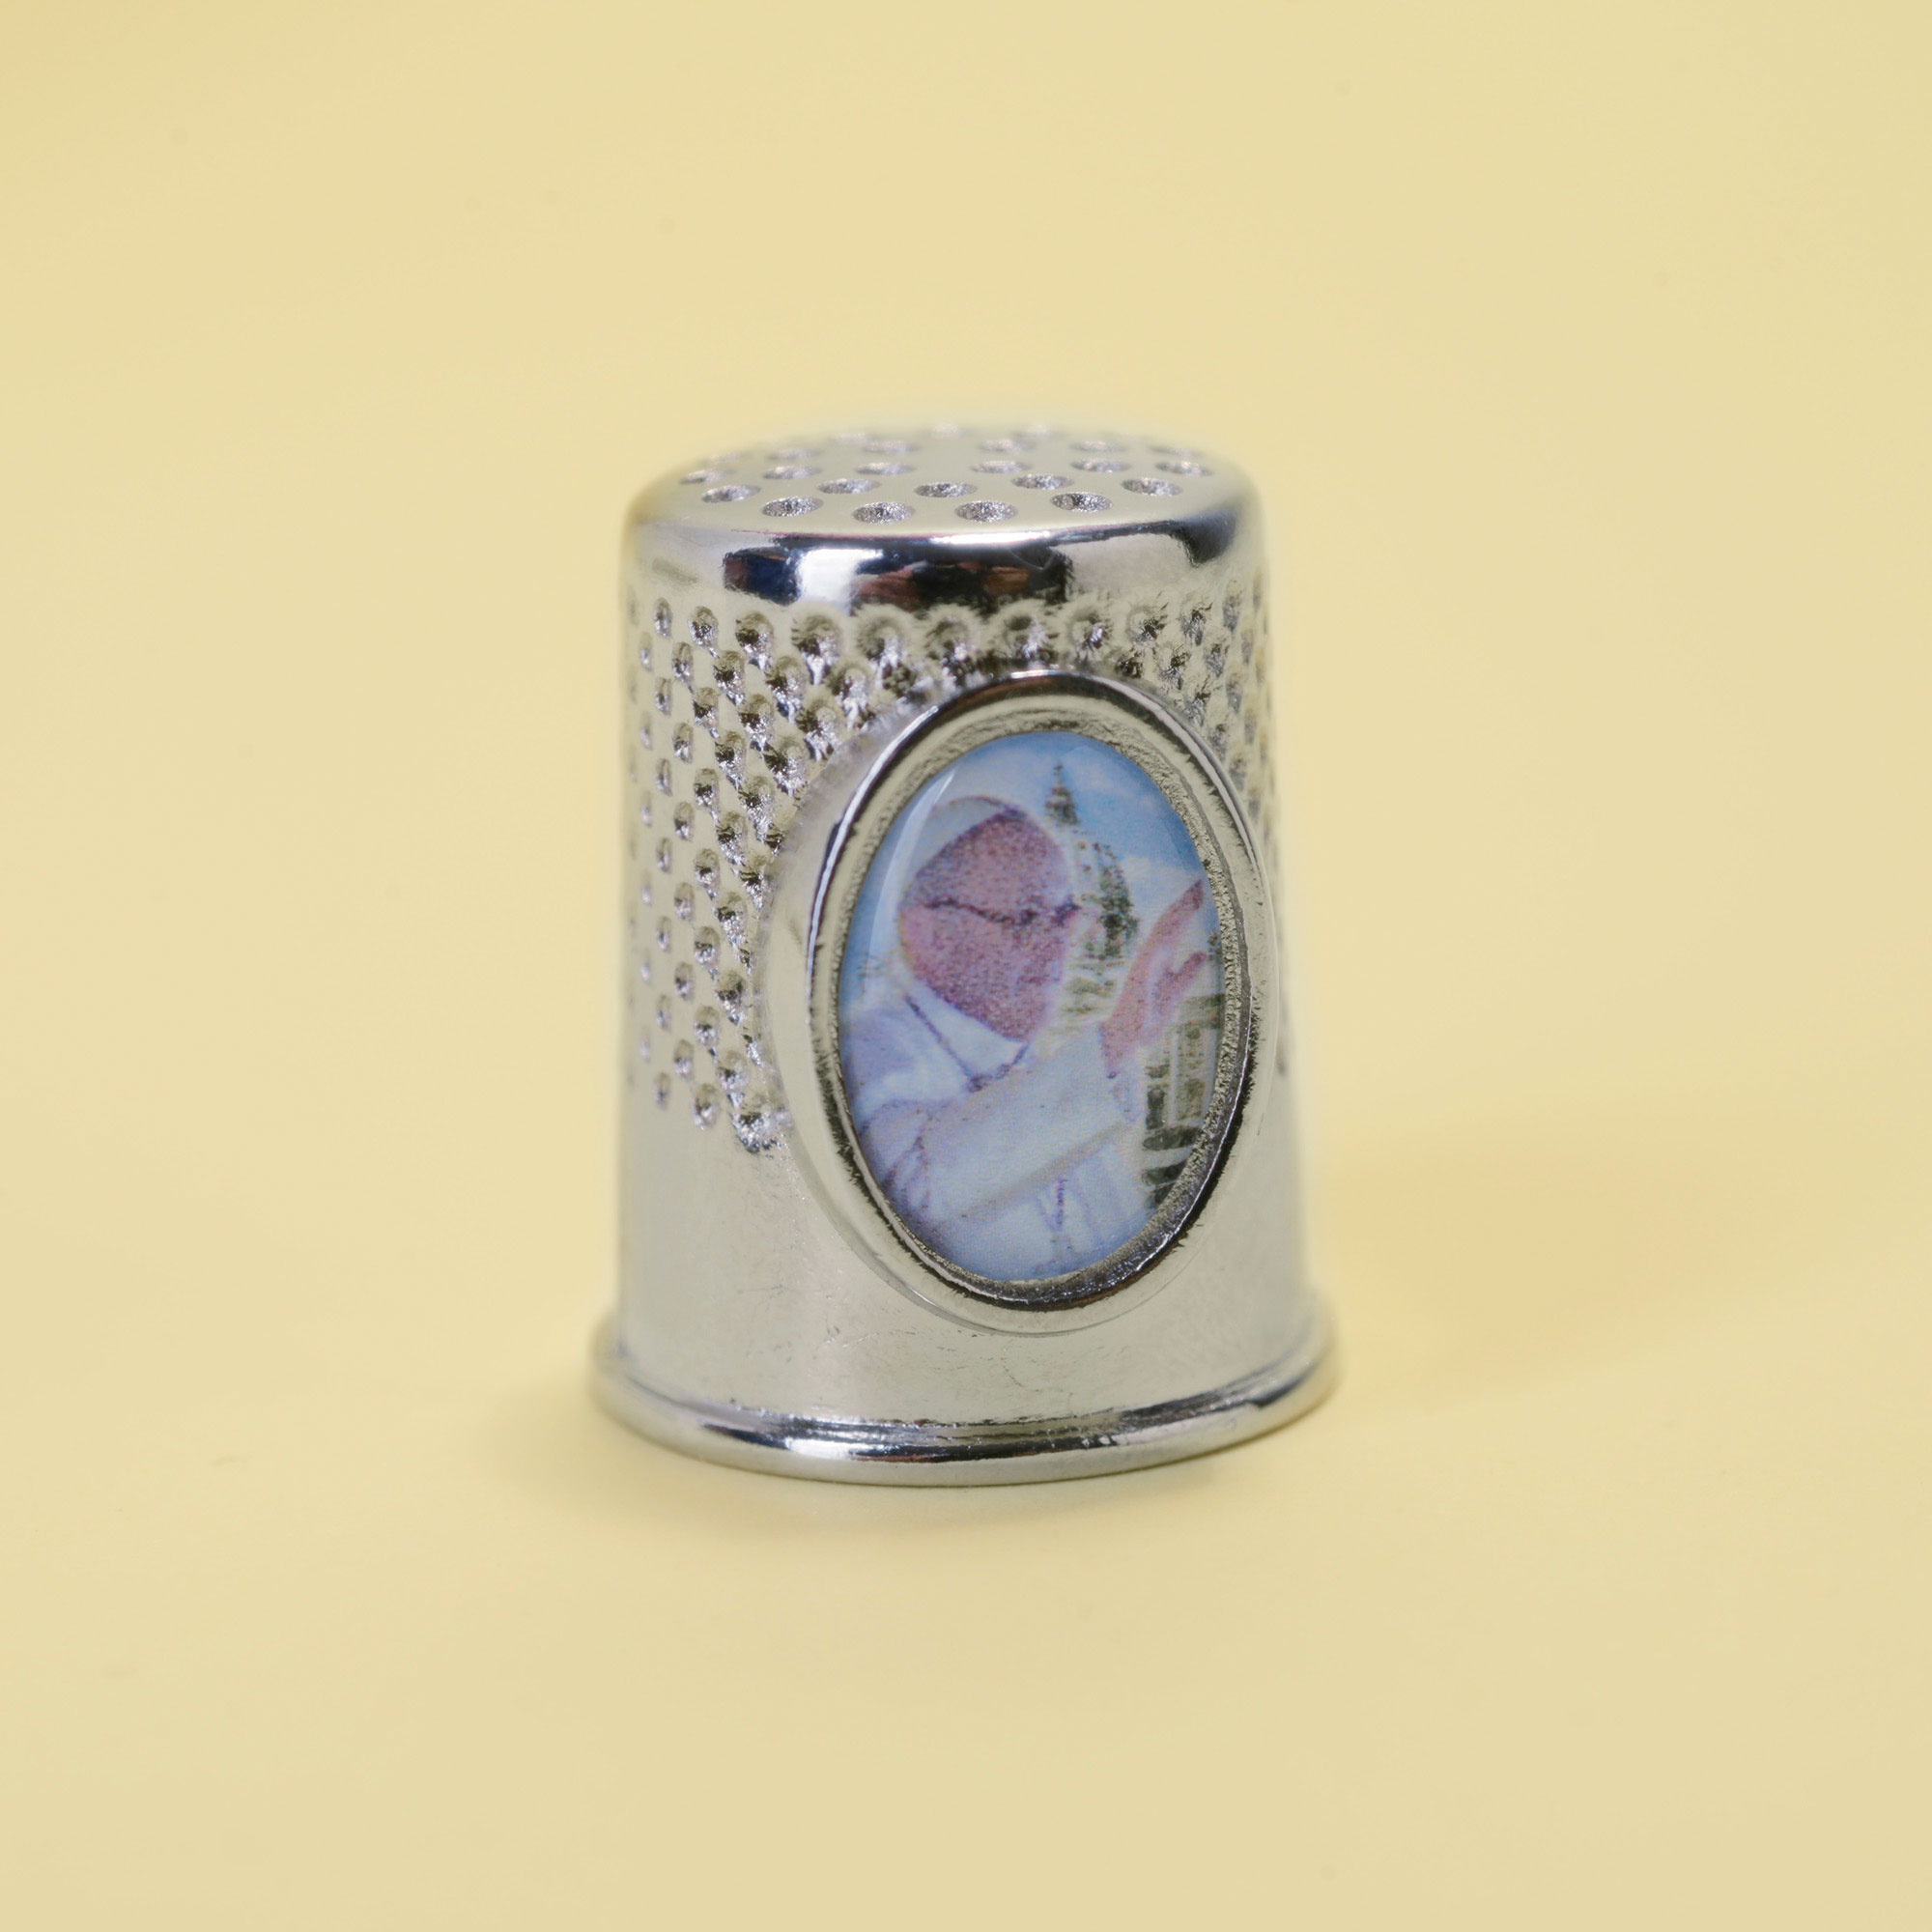 Metal thimble with the image of Pope Francis.

Price :  5 €